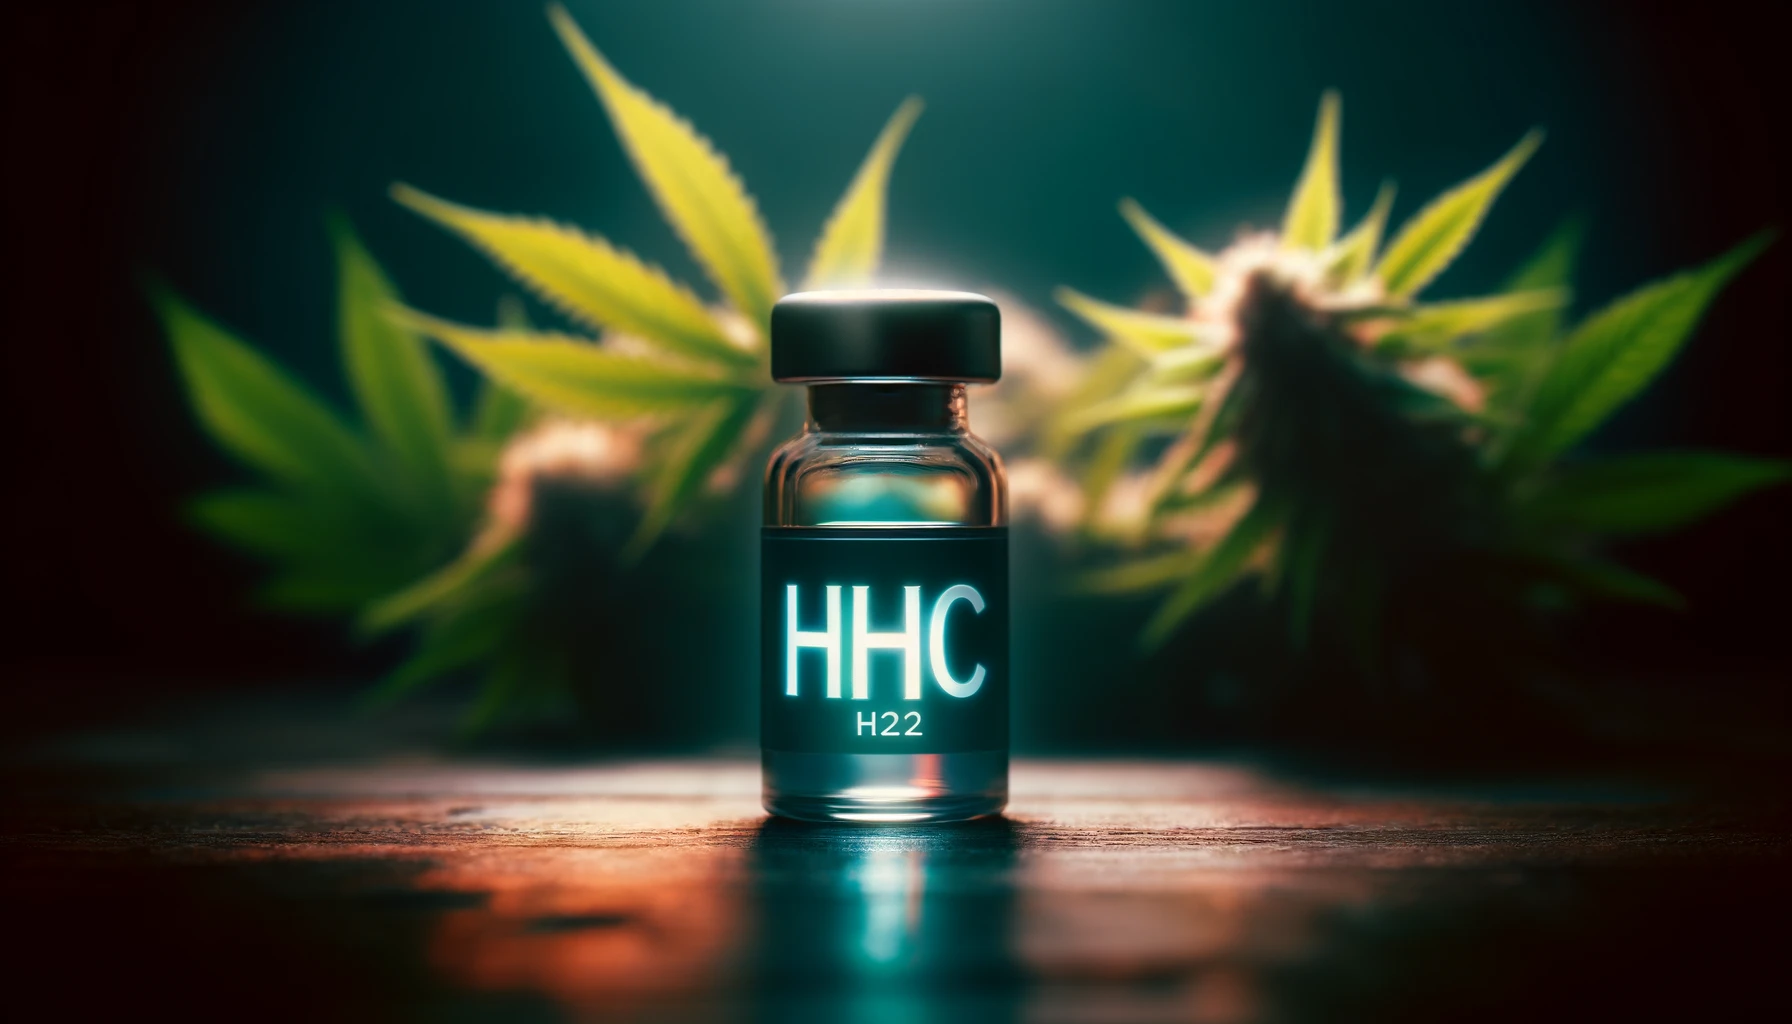 Mysterious glowing vial of HHC with cannabis leaves